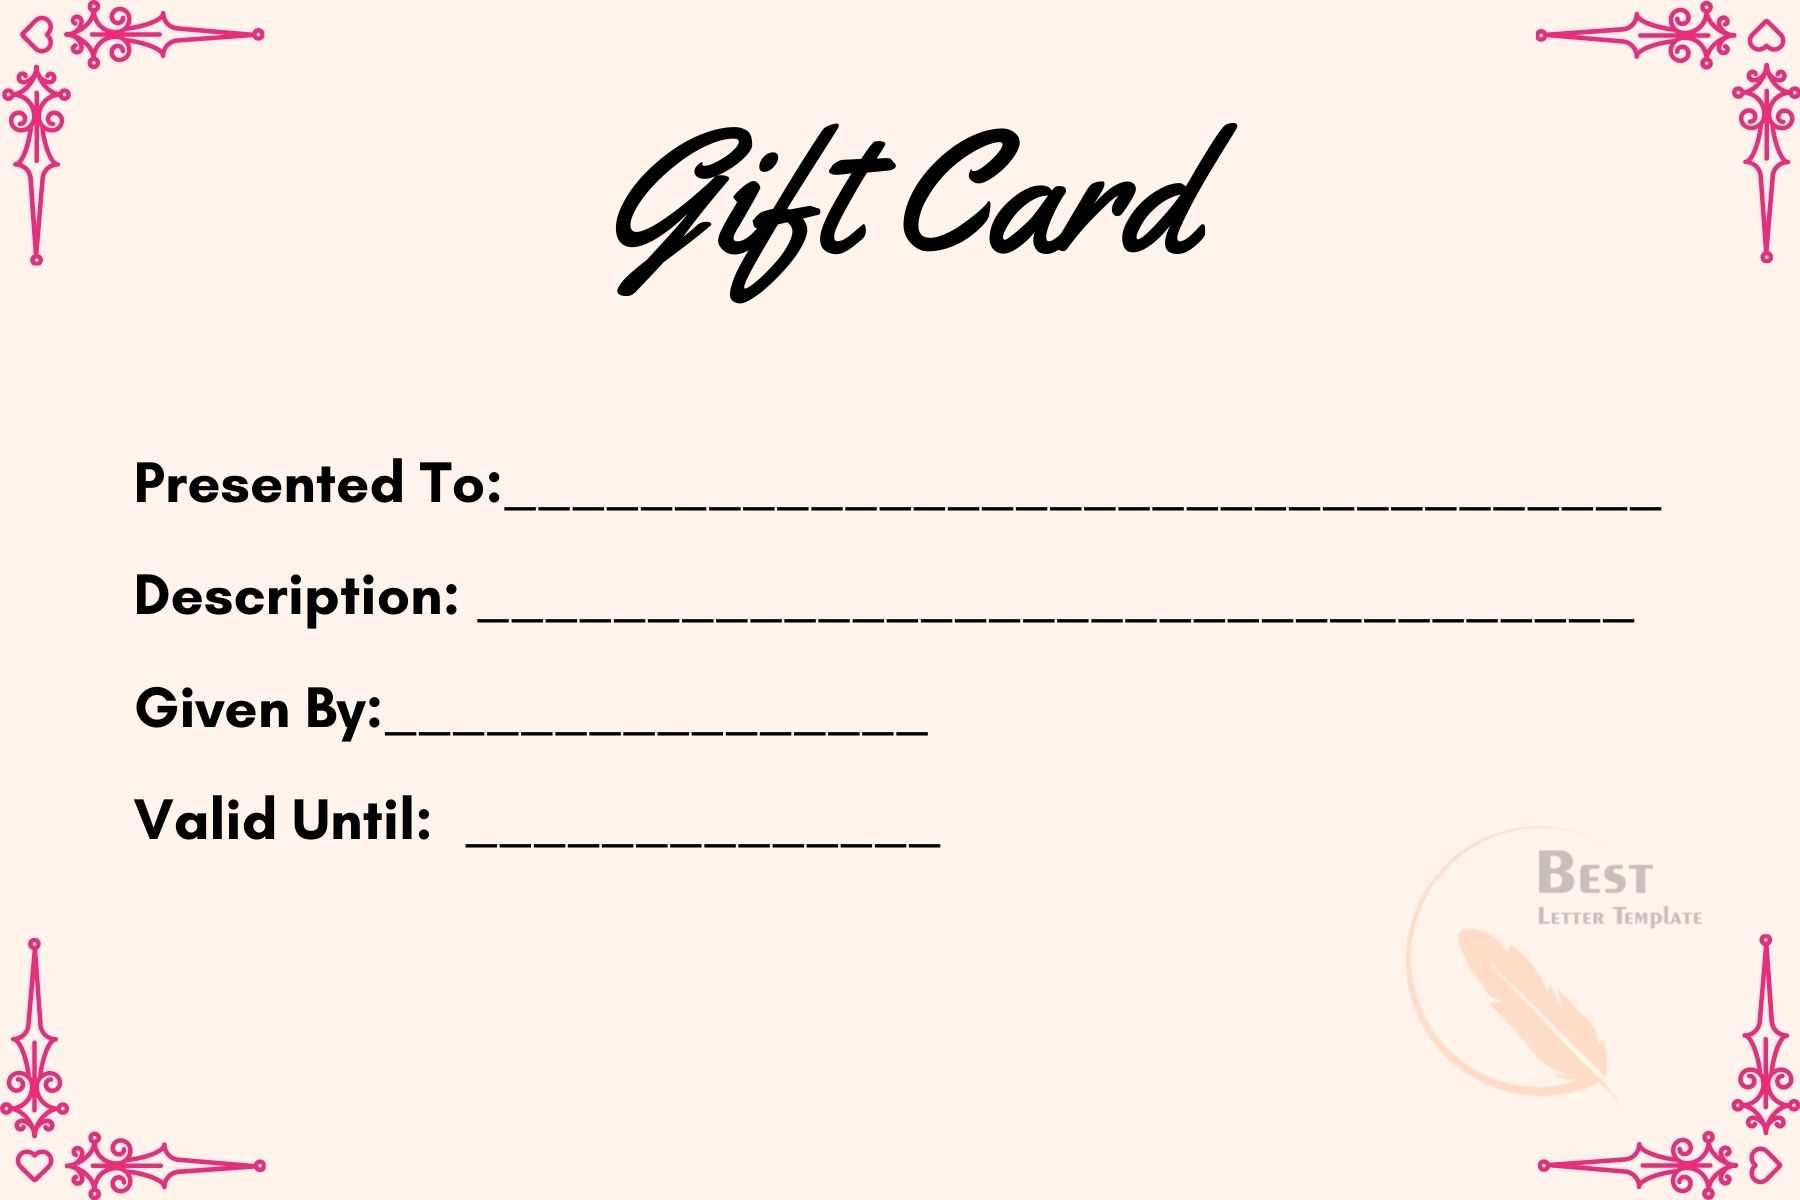 free-blank-printable-gift-voucher-template-in-word-pdf